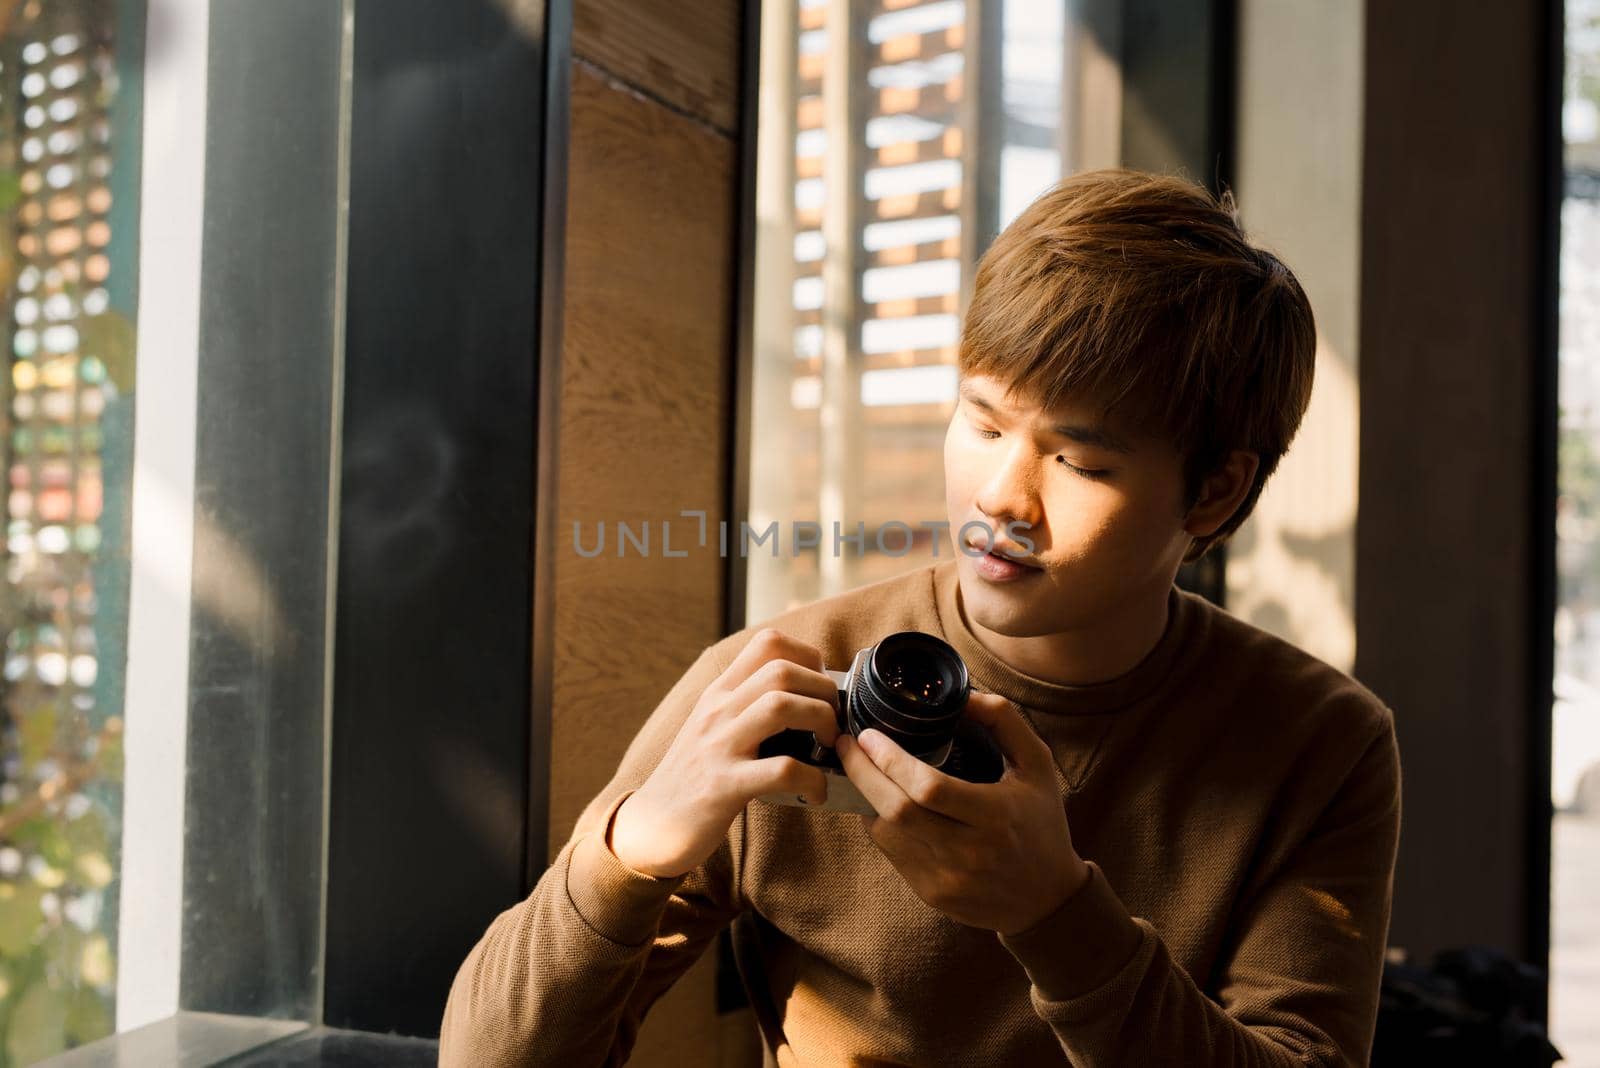 Asian Male professional photographer dressed in casual outfit making setting on display choosing filters on vintage camera and watching photos while resting in coffee shop interior near window by makidotvn